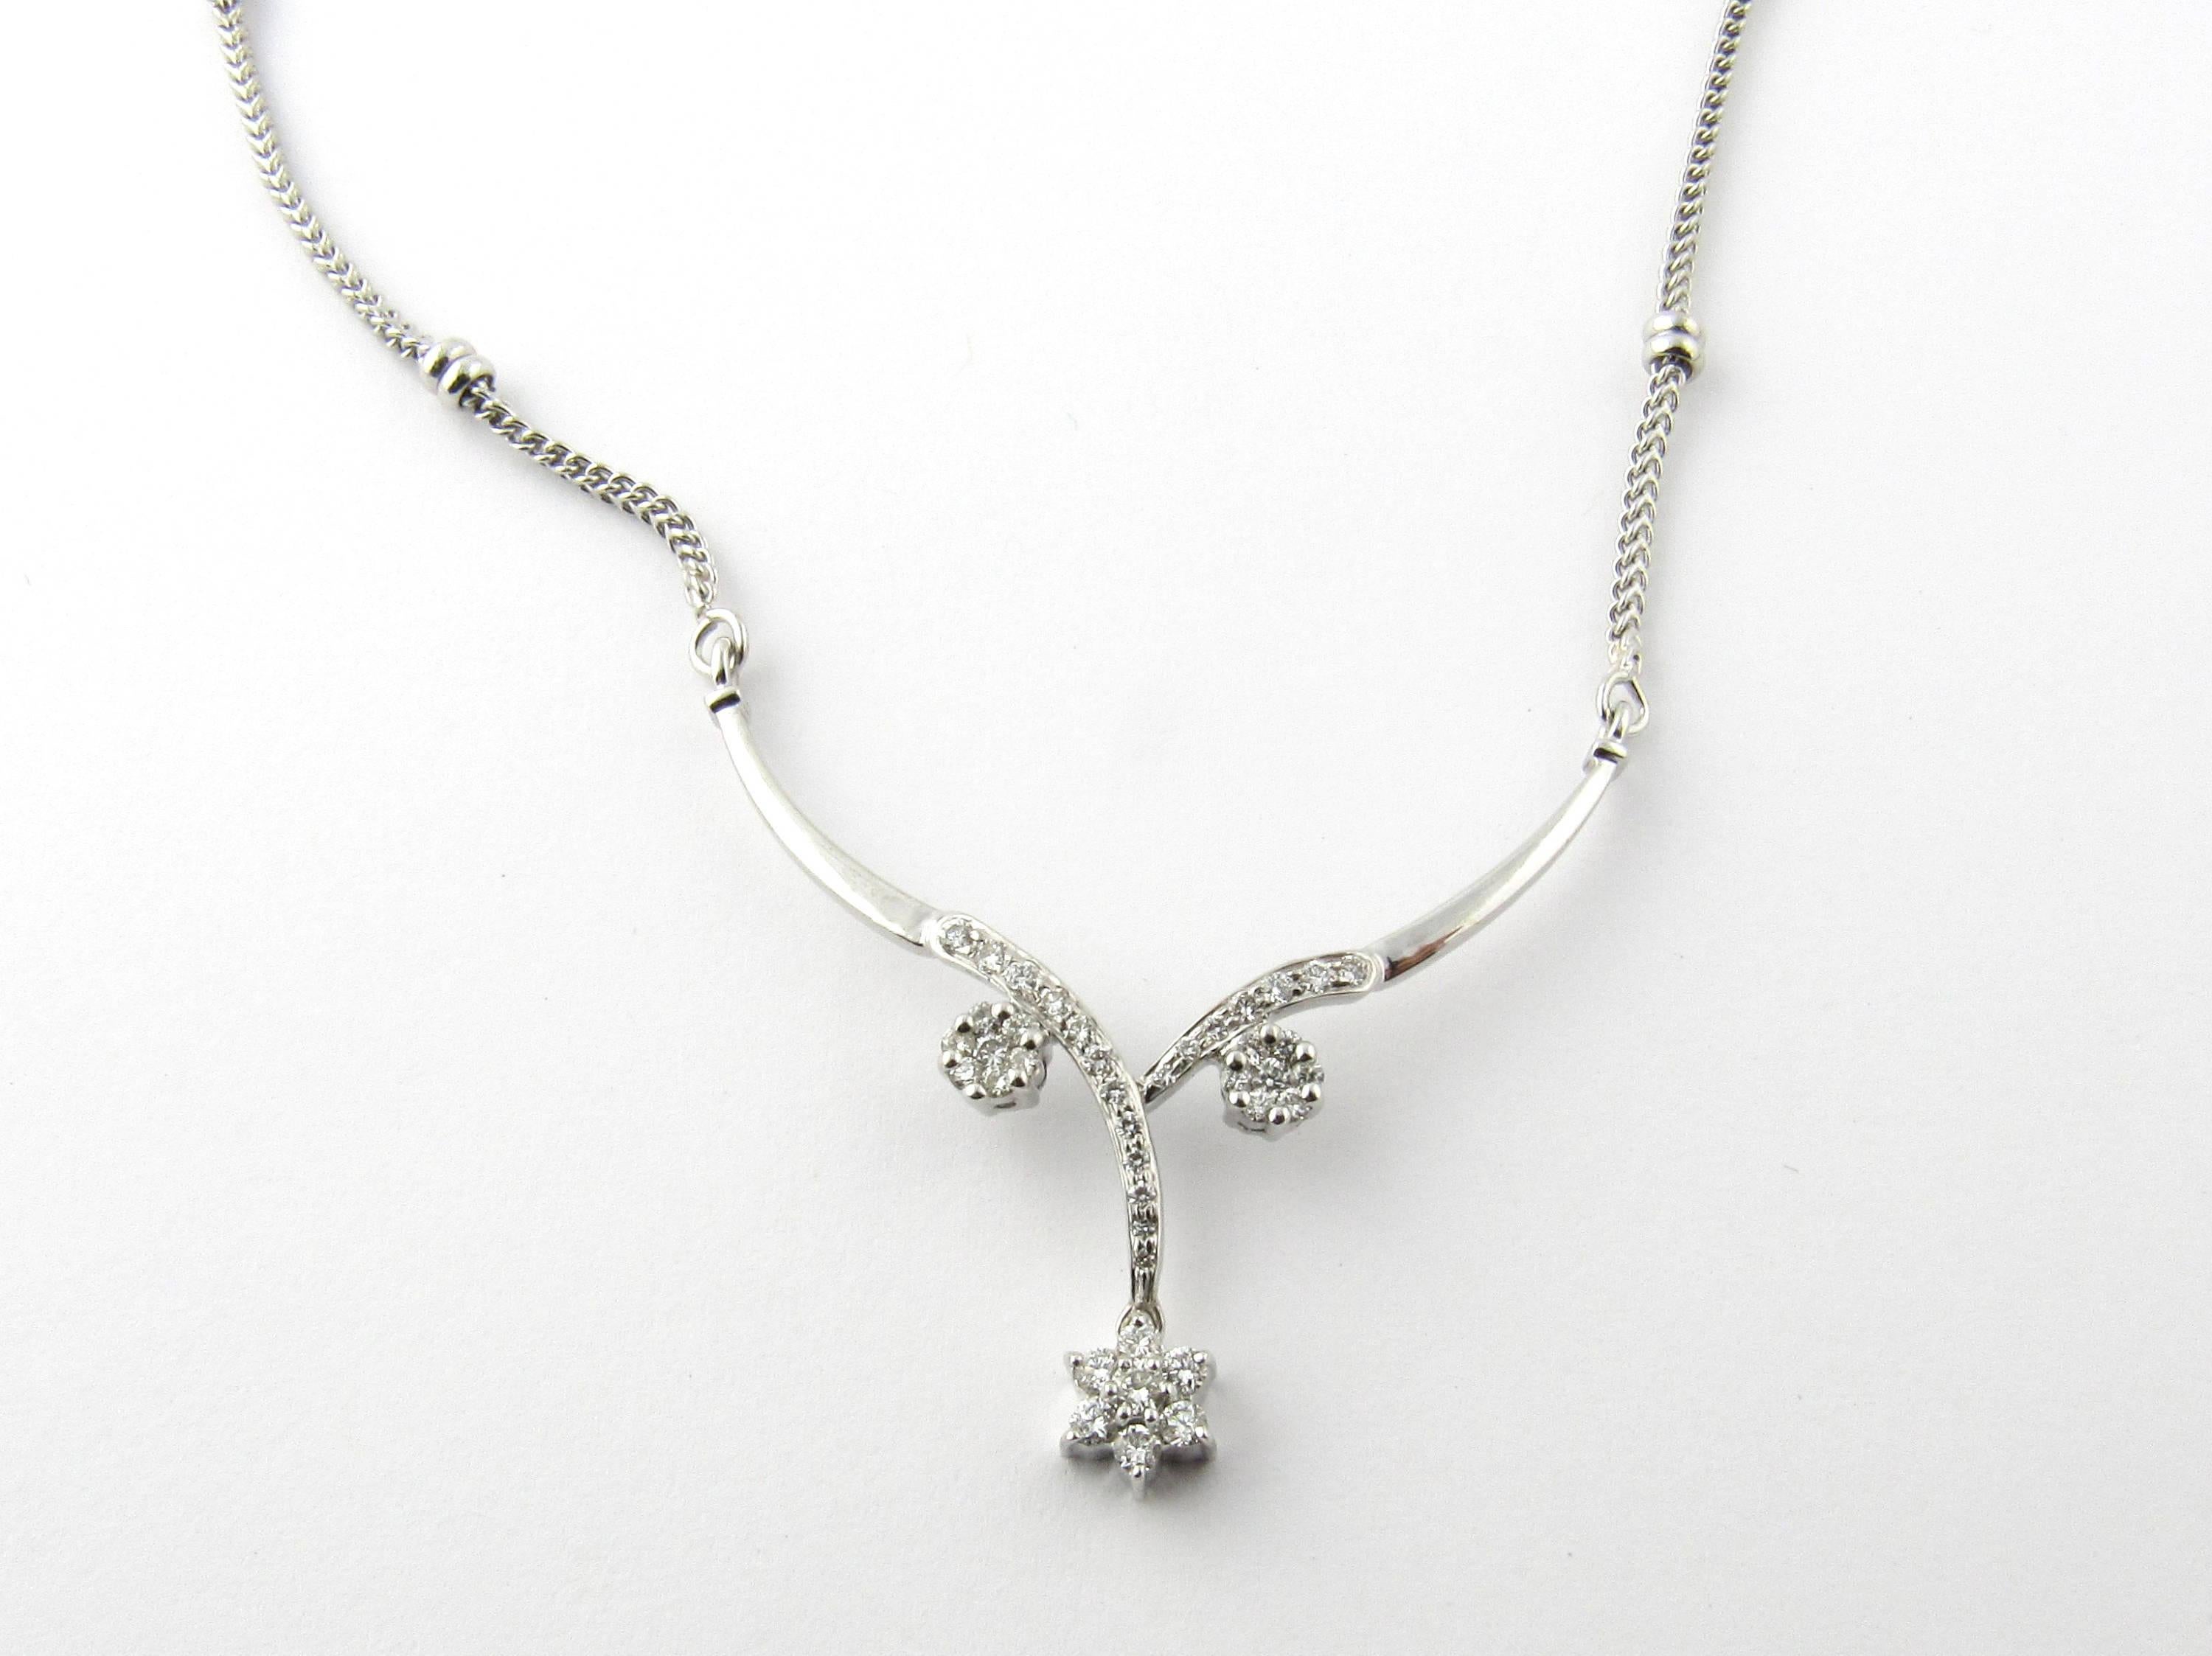 Vintage 18 Karat White Gold and Diamond Necklace- 
This elegant necklace features 40 round brilliant cut diamonds in a lovely flower design on a white gold beaded chain. Approximate total diamond weight: .40 ct. Diamond clarity: SI2 Diamond color: